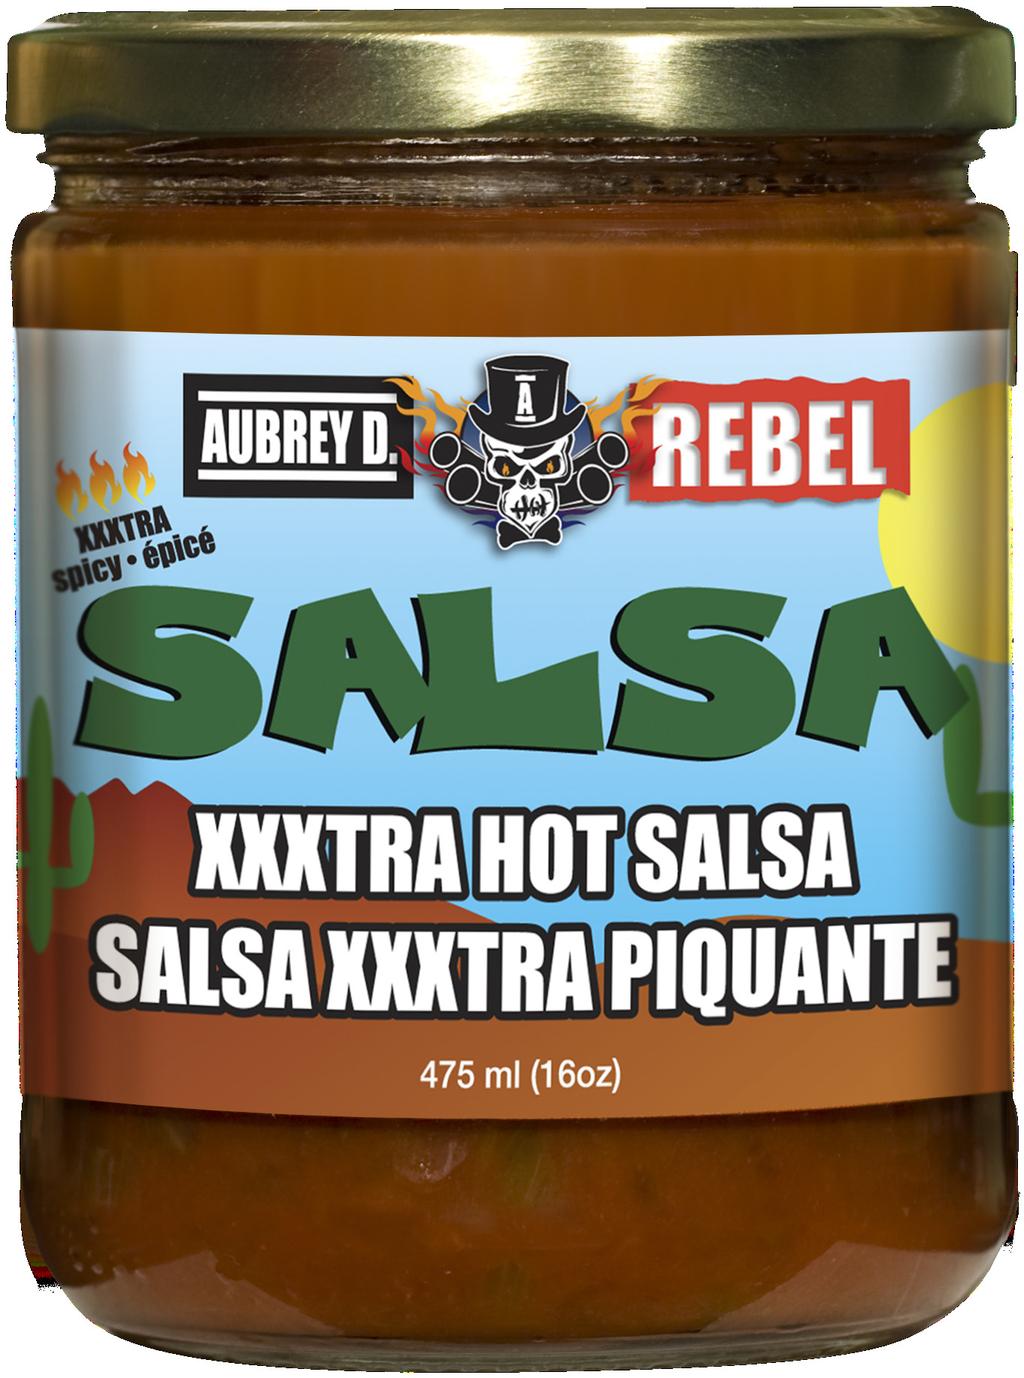 THE PARTY IS ON! XXXTRA Introducing a brand new collection of QUESO, SALSA AND WING SAUCE from Aubrey D.